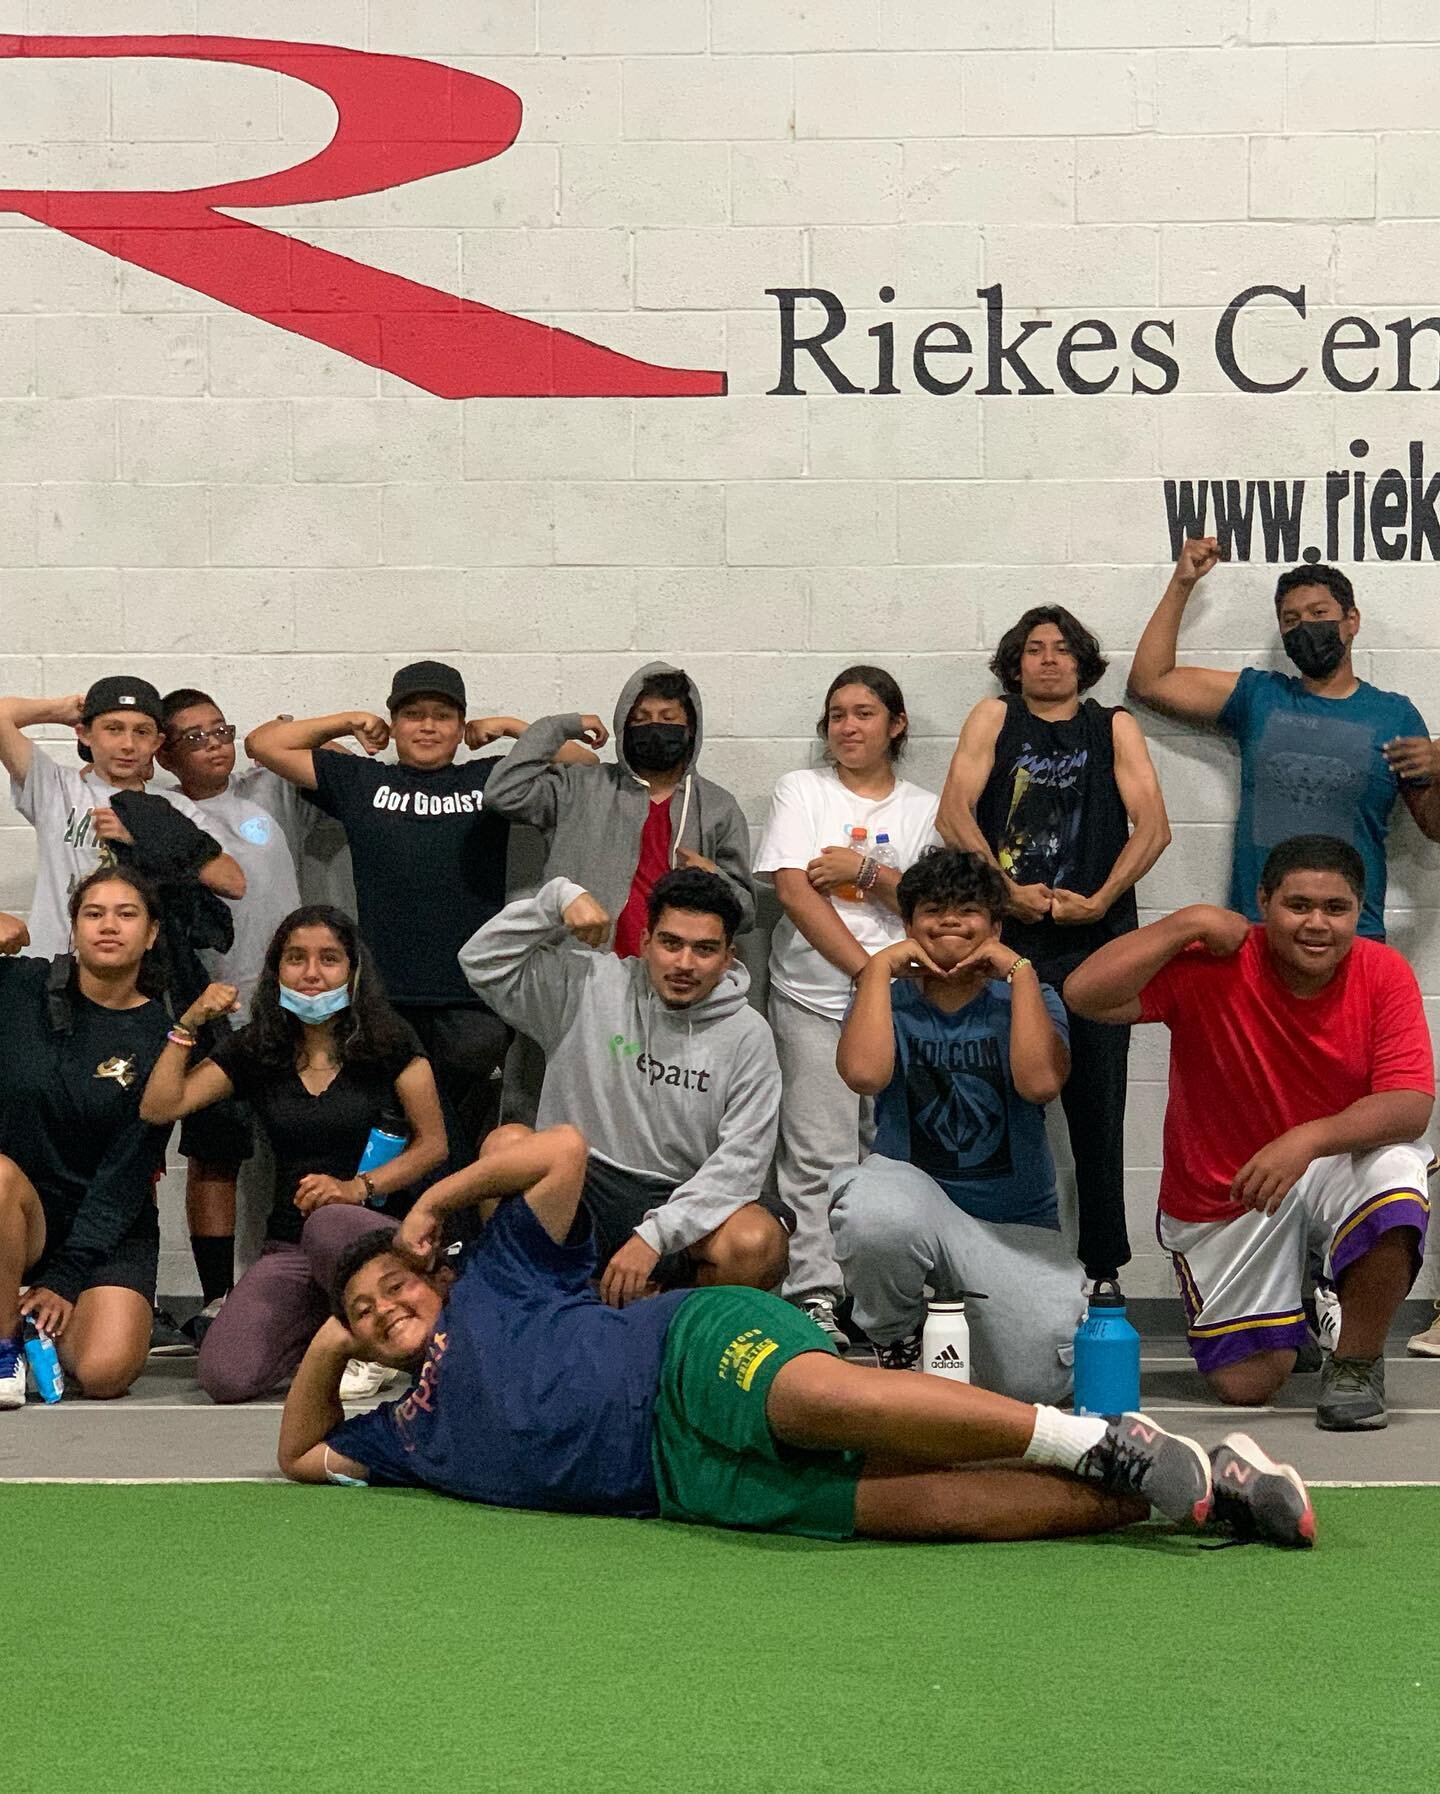 Great final week for the EPATT-All Middle Schoolers! Tour of @canadacollegerwc , Q&amp;A with @canadacollegesoccer ⚽️, interview with Max Basing @stanfordmenstennis 🎾 ,&nbsp;&nbsp;final workout 💪🏽 and BBQ🍔 @theriekescenter , then tutoring 💻 &amp